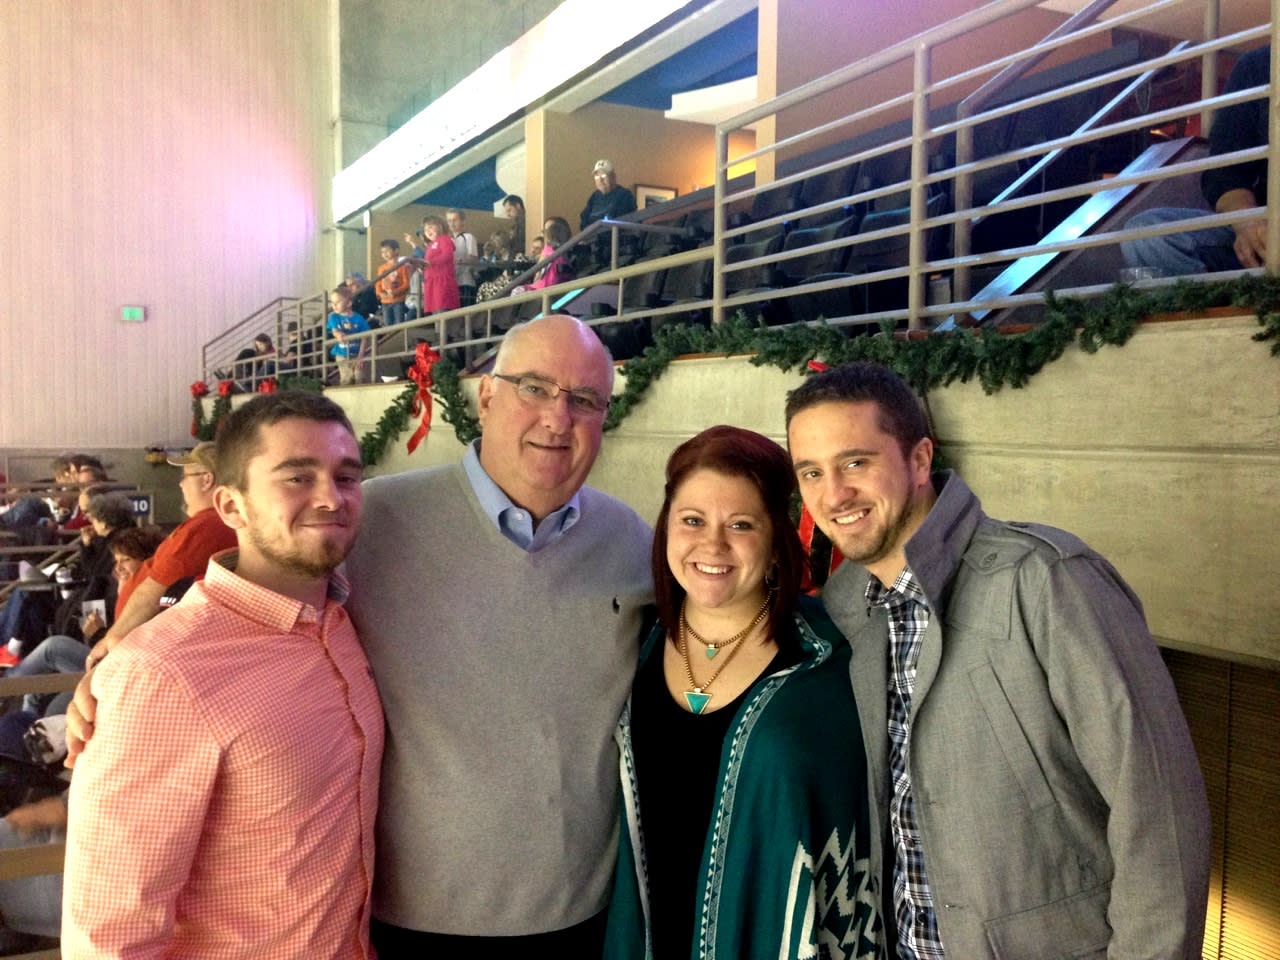 The annual Komets Thanksgiving night game is a tradition for myself, my brothers and my grandpa!